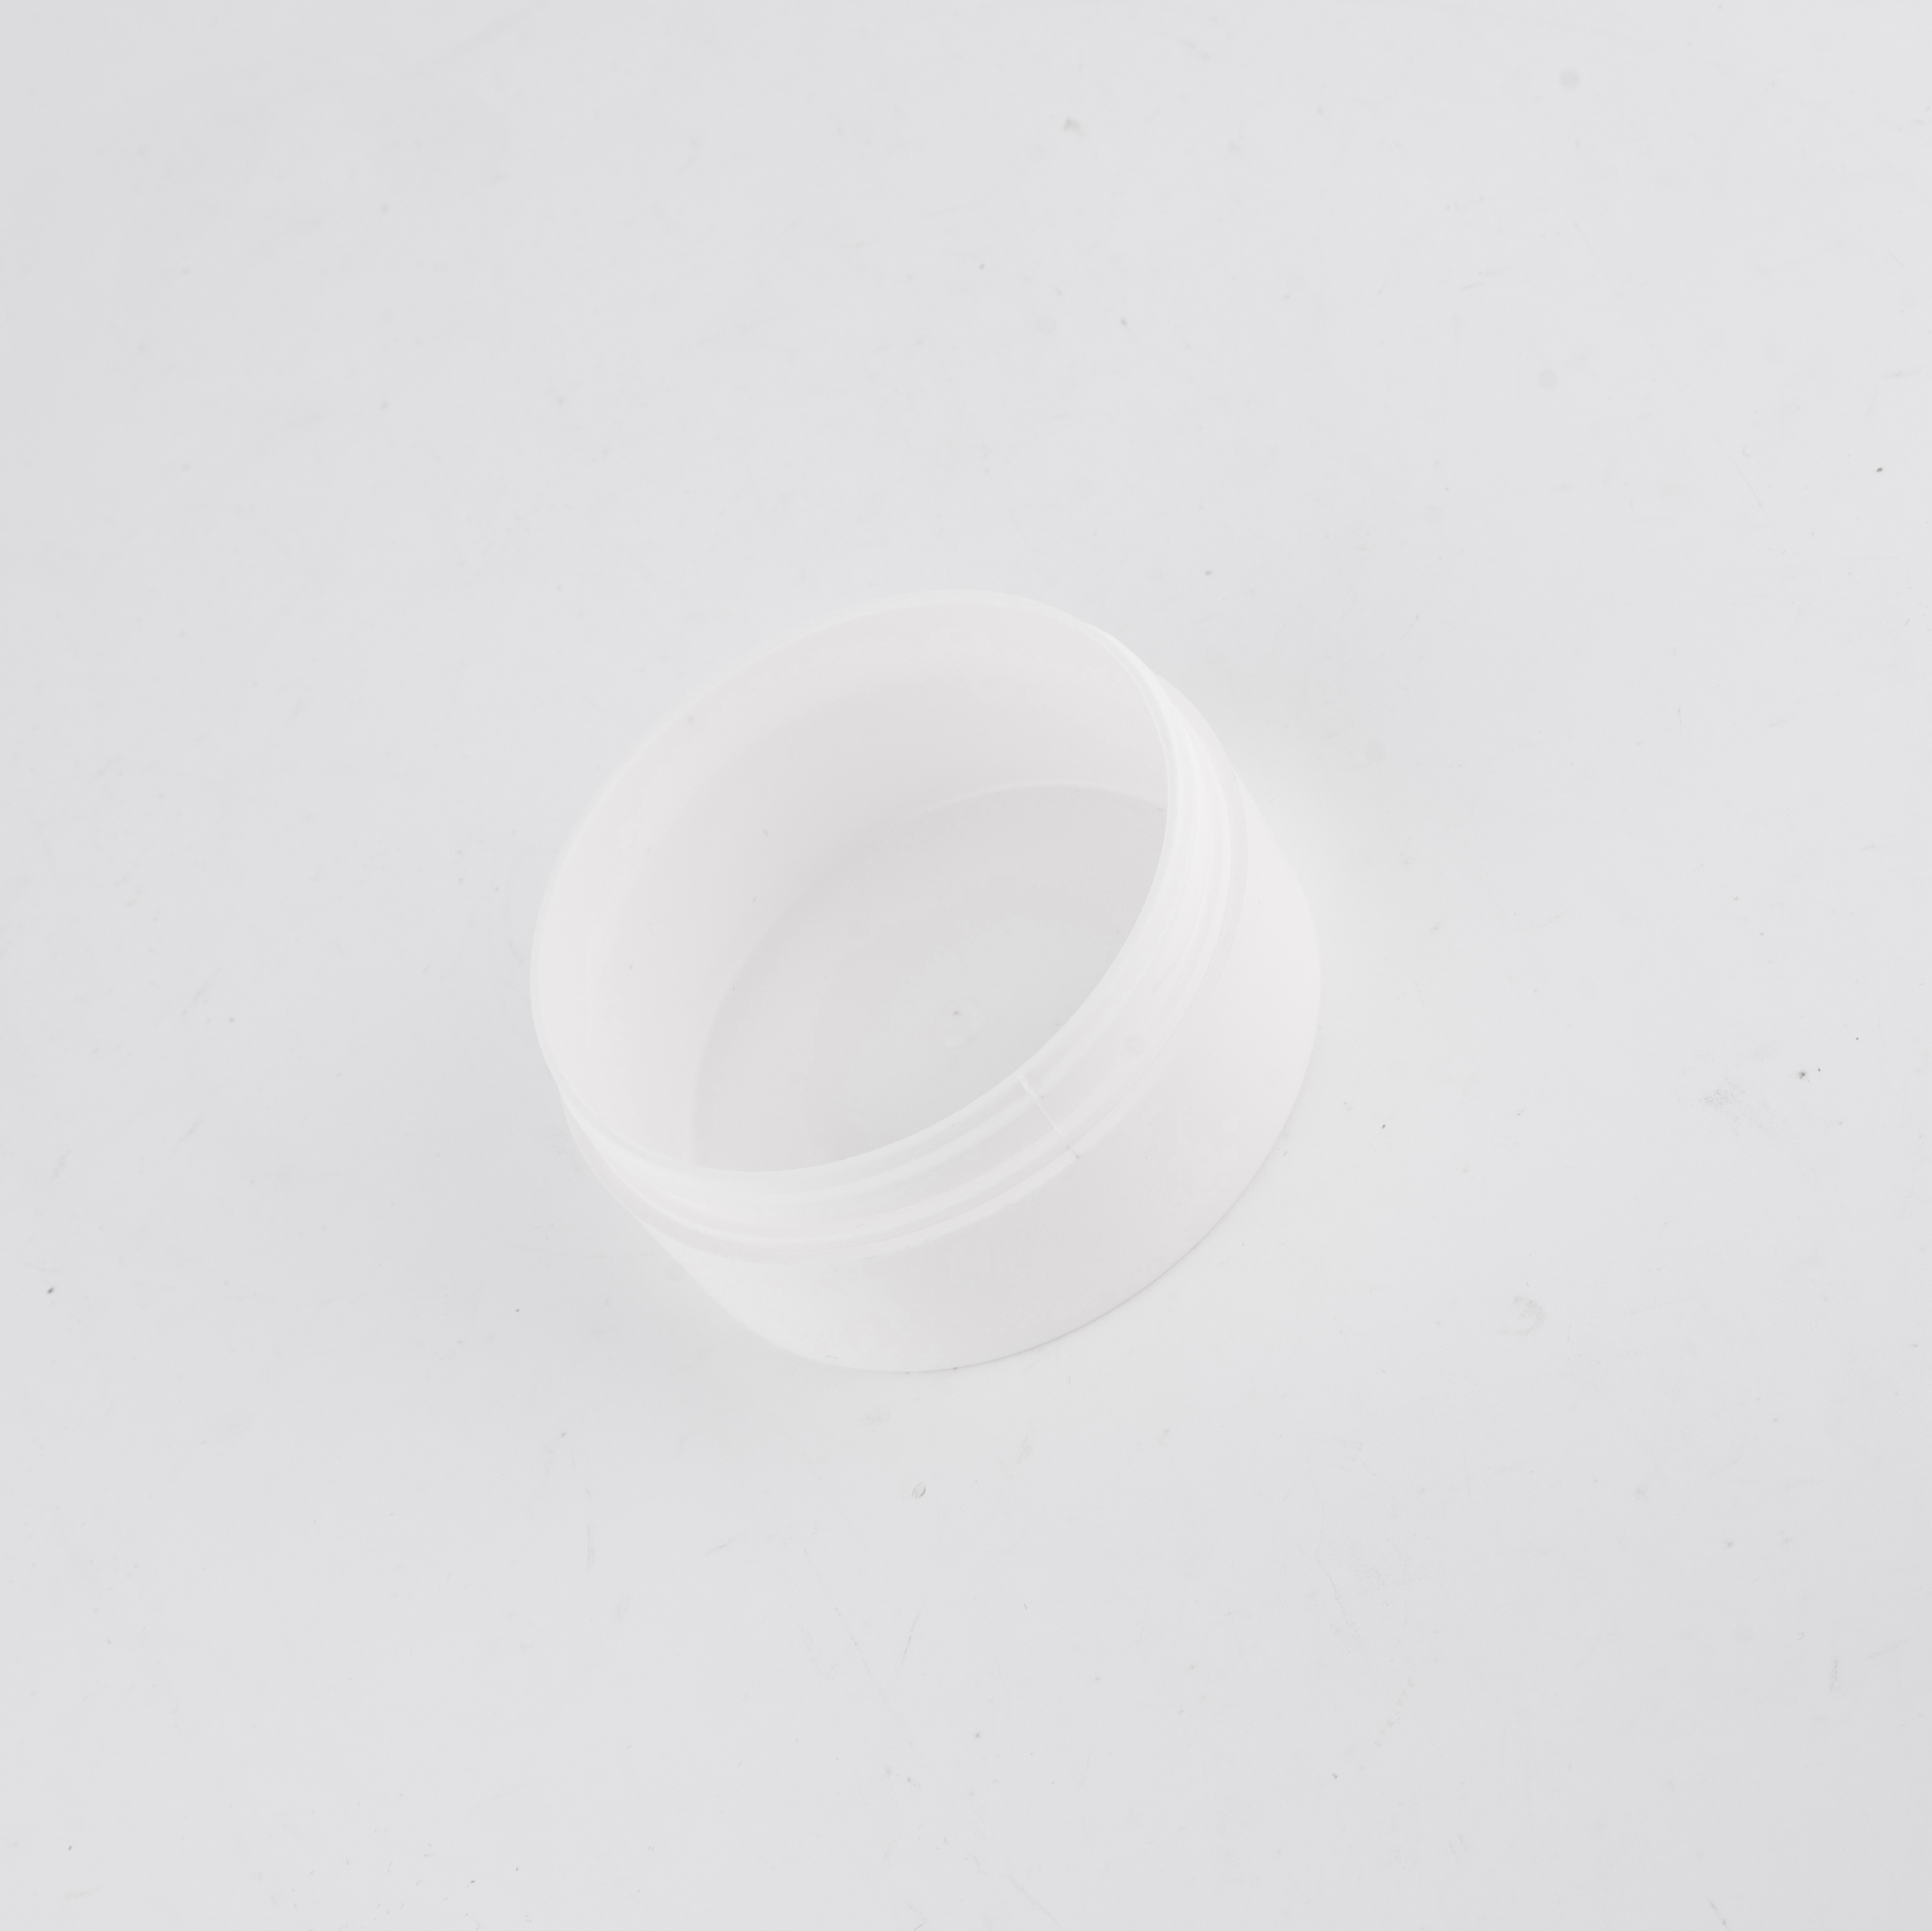 50g Wide Mouth Plastic Jar with Lid